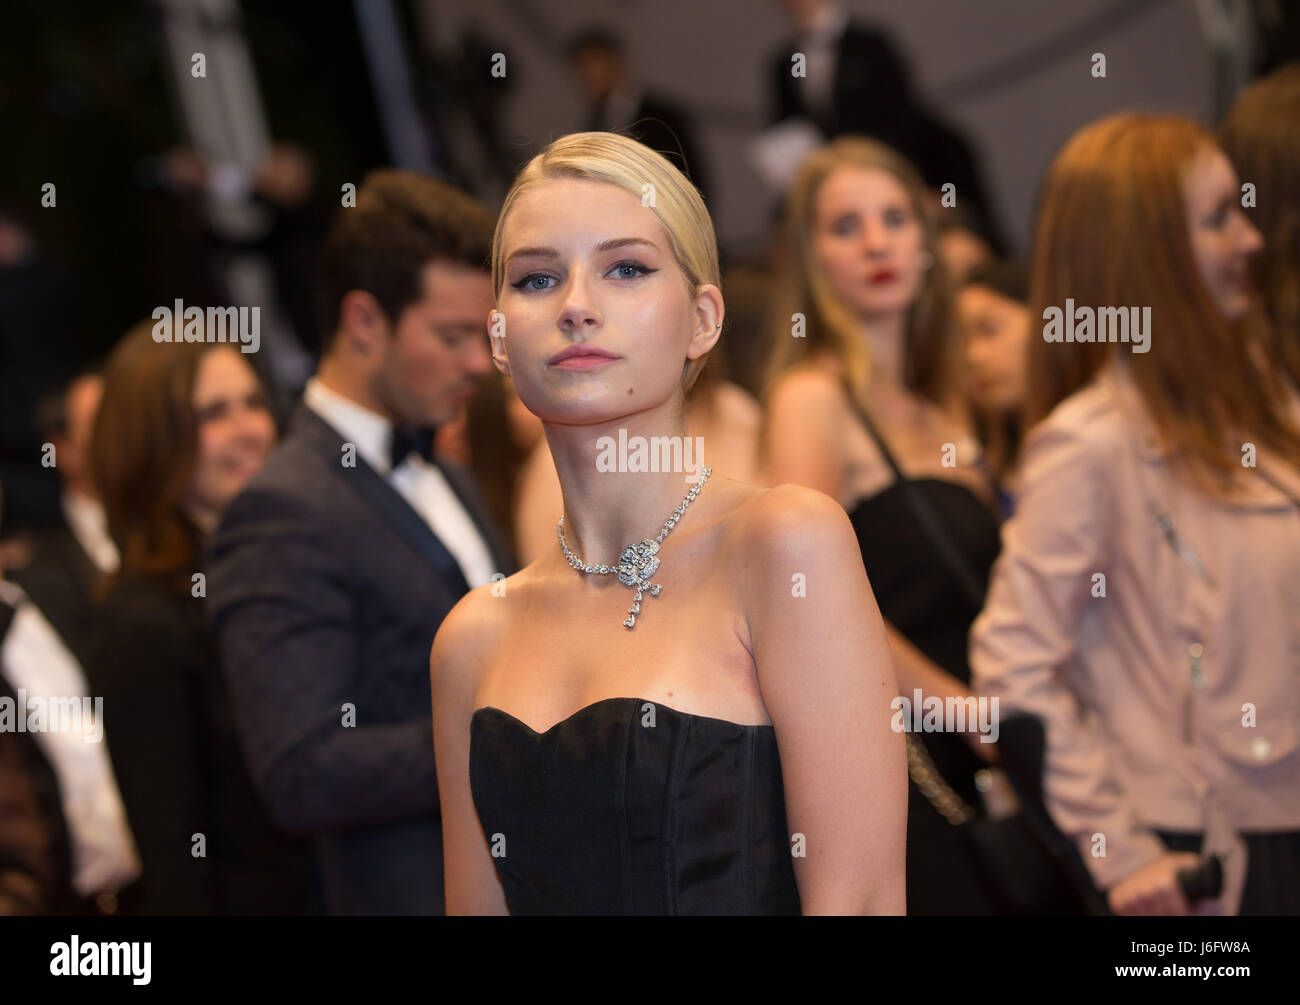 Cannes, France. 20th May, 2017. British model Lottie Moss poses on the red carpet for the screening of the film 'The Square' in competition at the 70th Cannes International Film Festival in Cannes, France, on May 20, 2017. Credit: Xu Jinquan/Xinhua/Alamy Live News Stock Photo